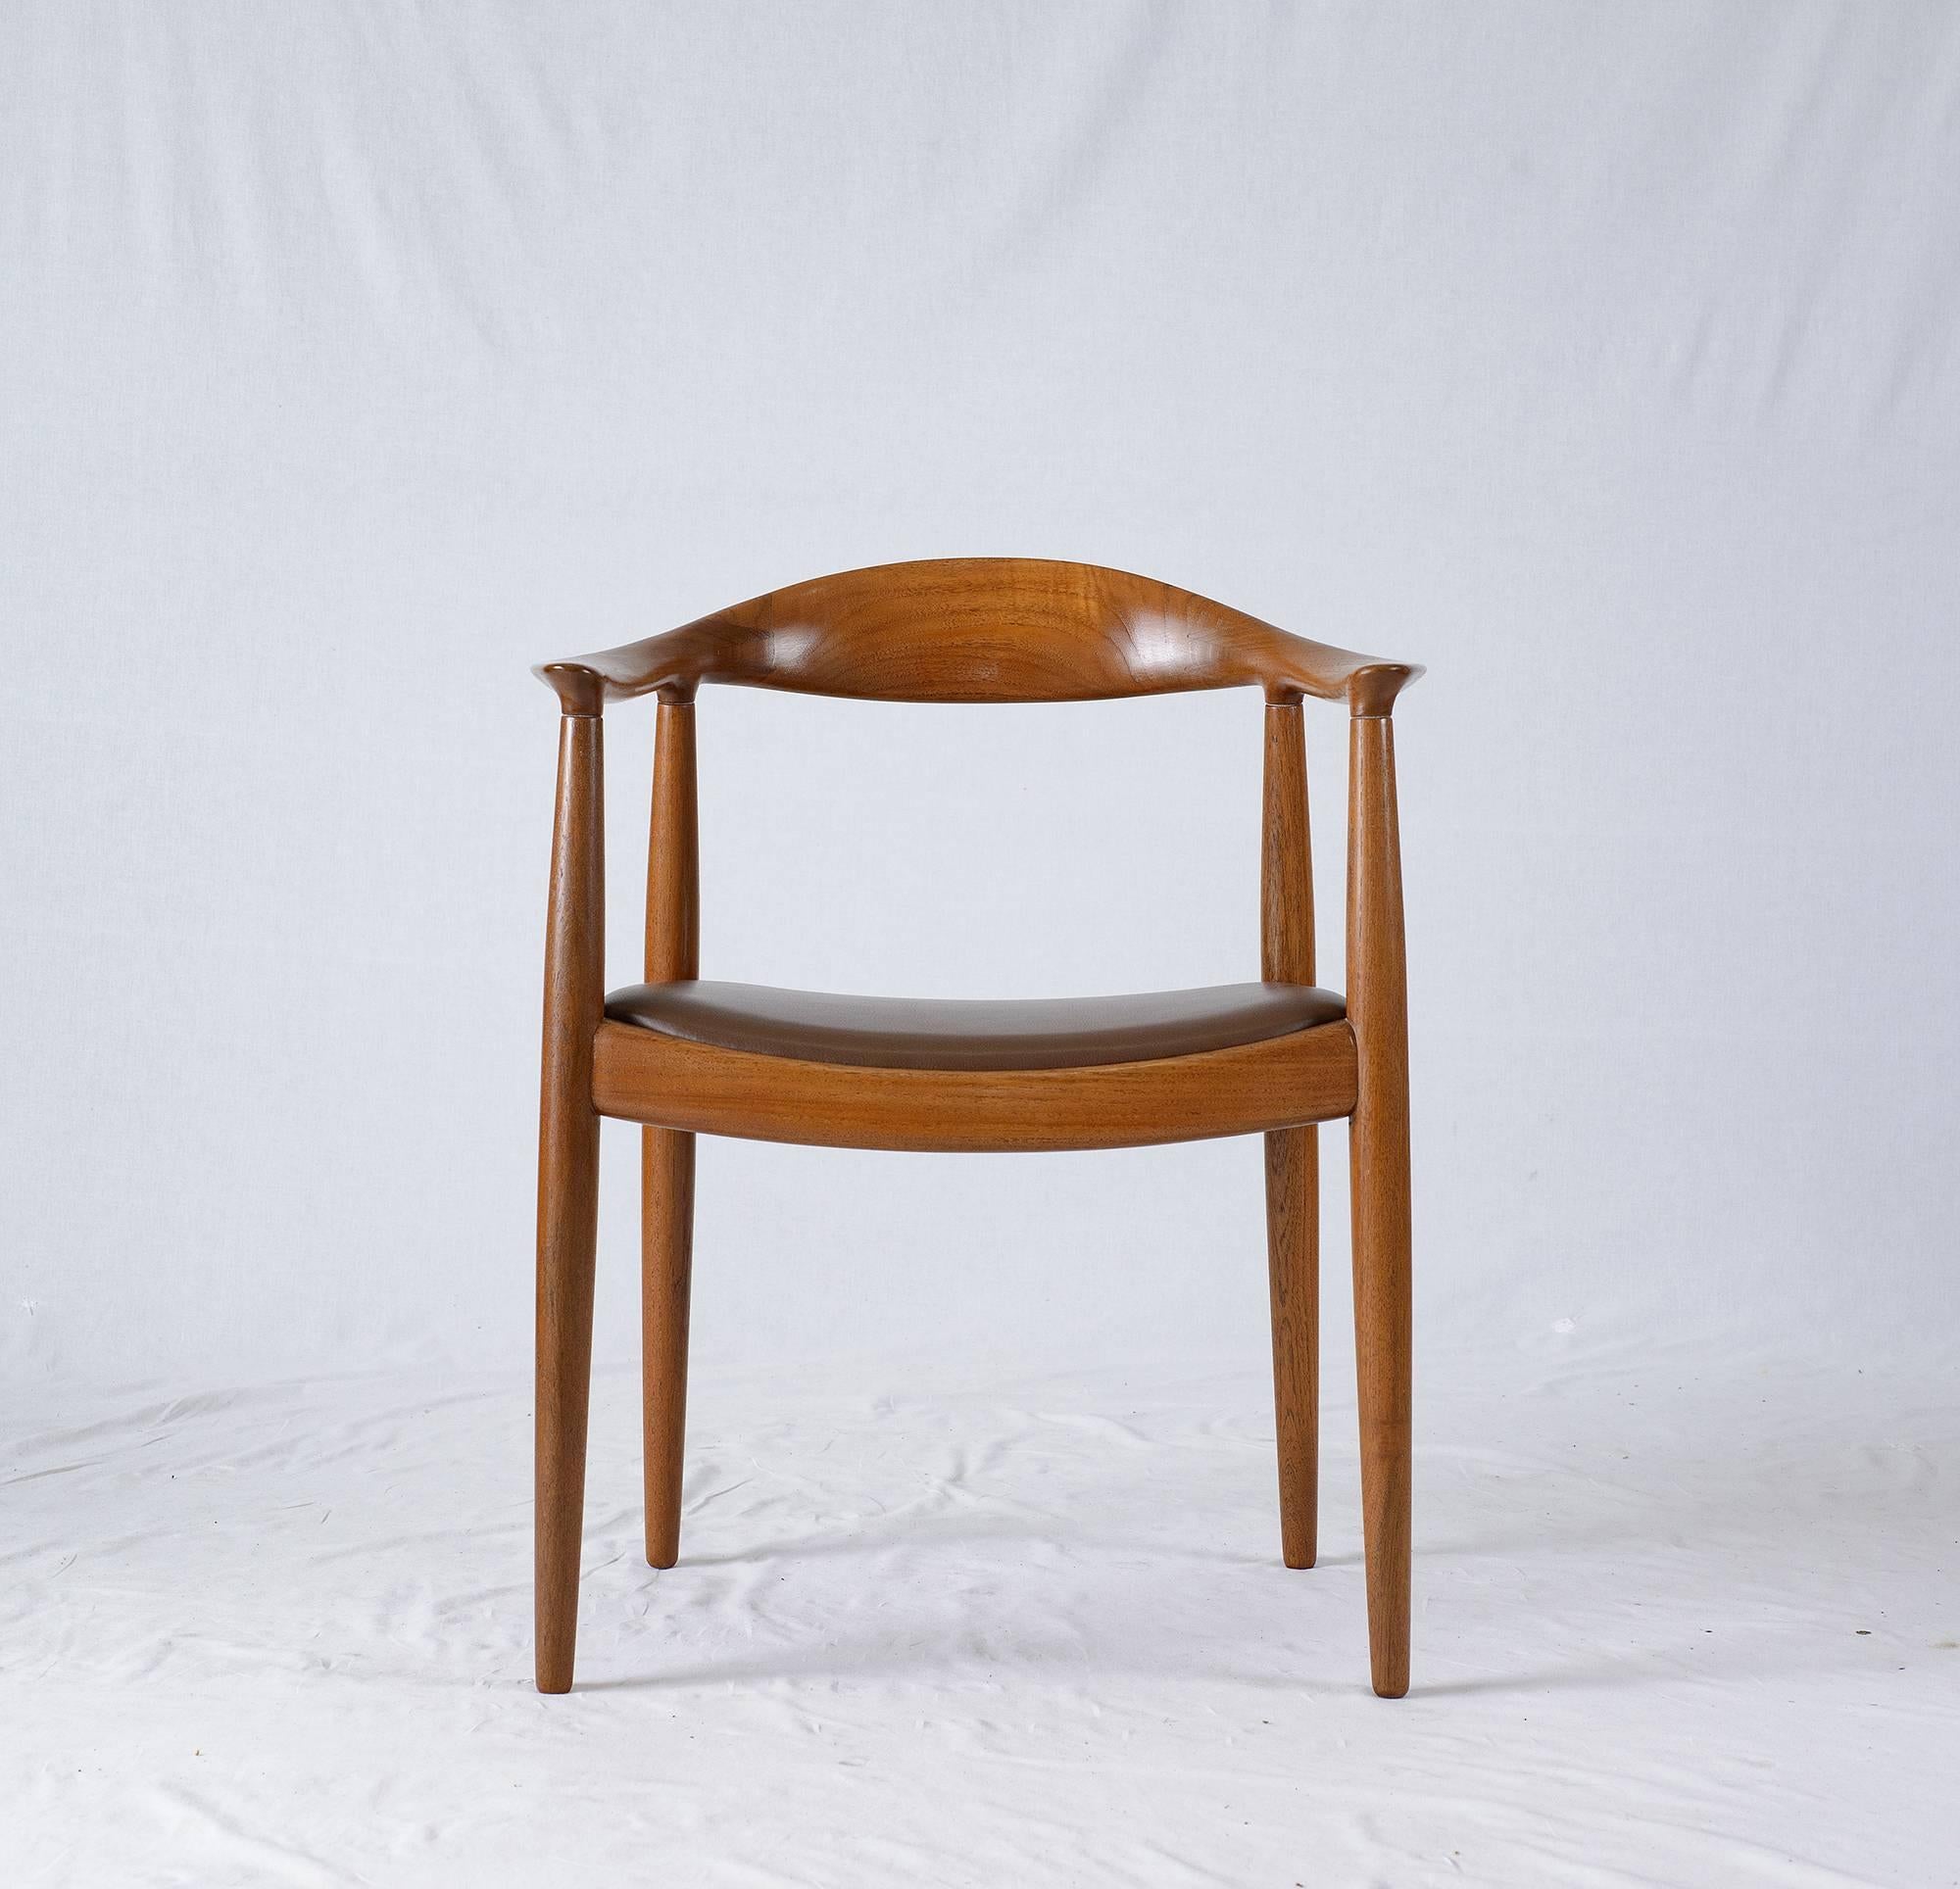 Set of 12 Hans Wegner JH-503 chairs designed in 1949 and Produced by Johannes Hansen.